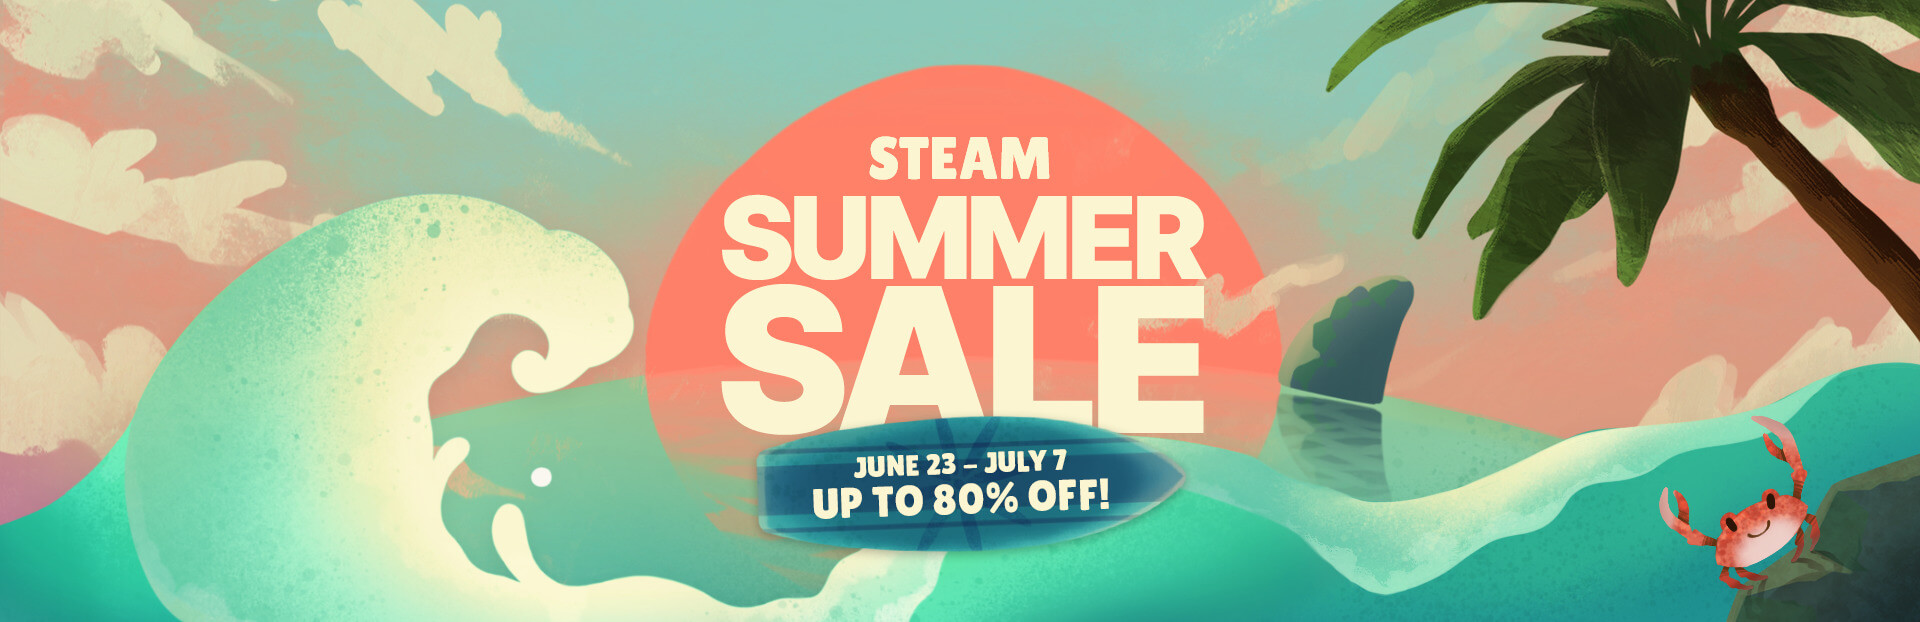 Chucklefish Steam Summer Sale 2022 is ready for you!